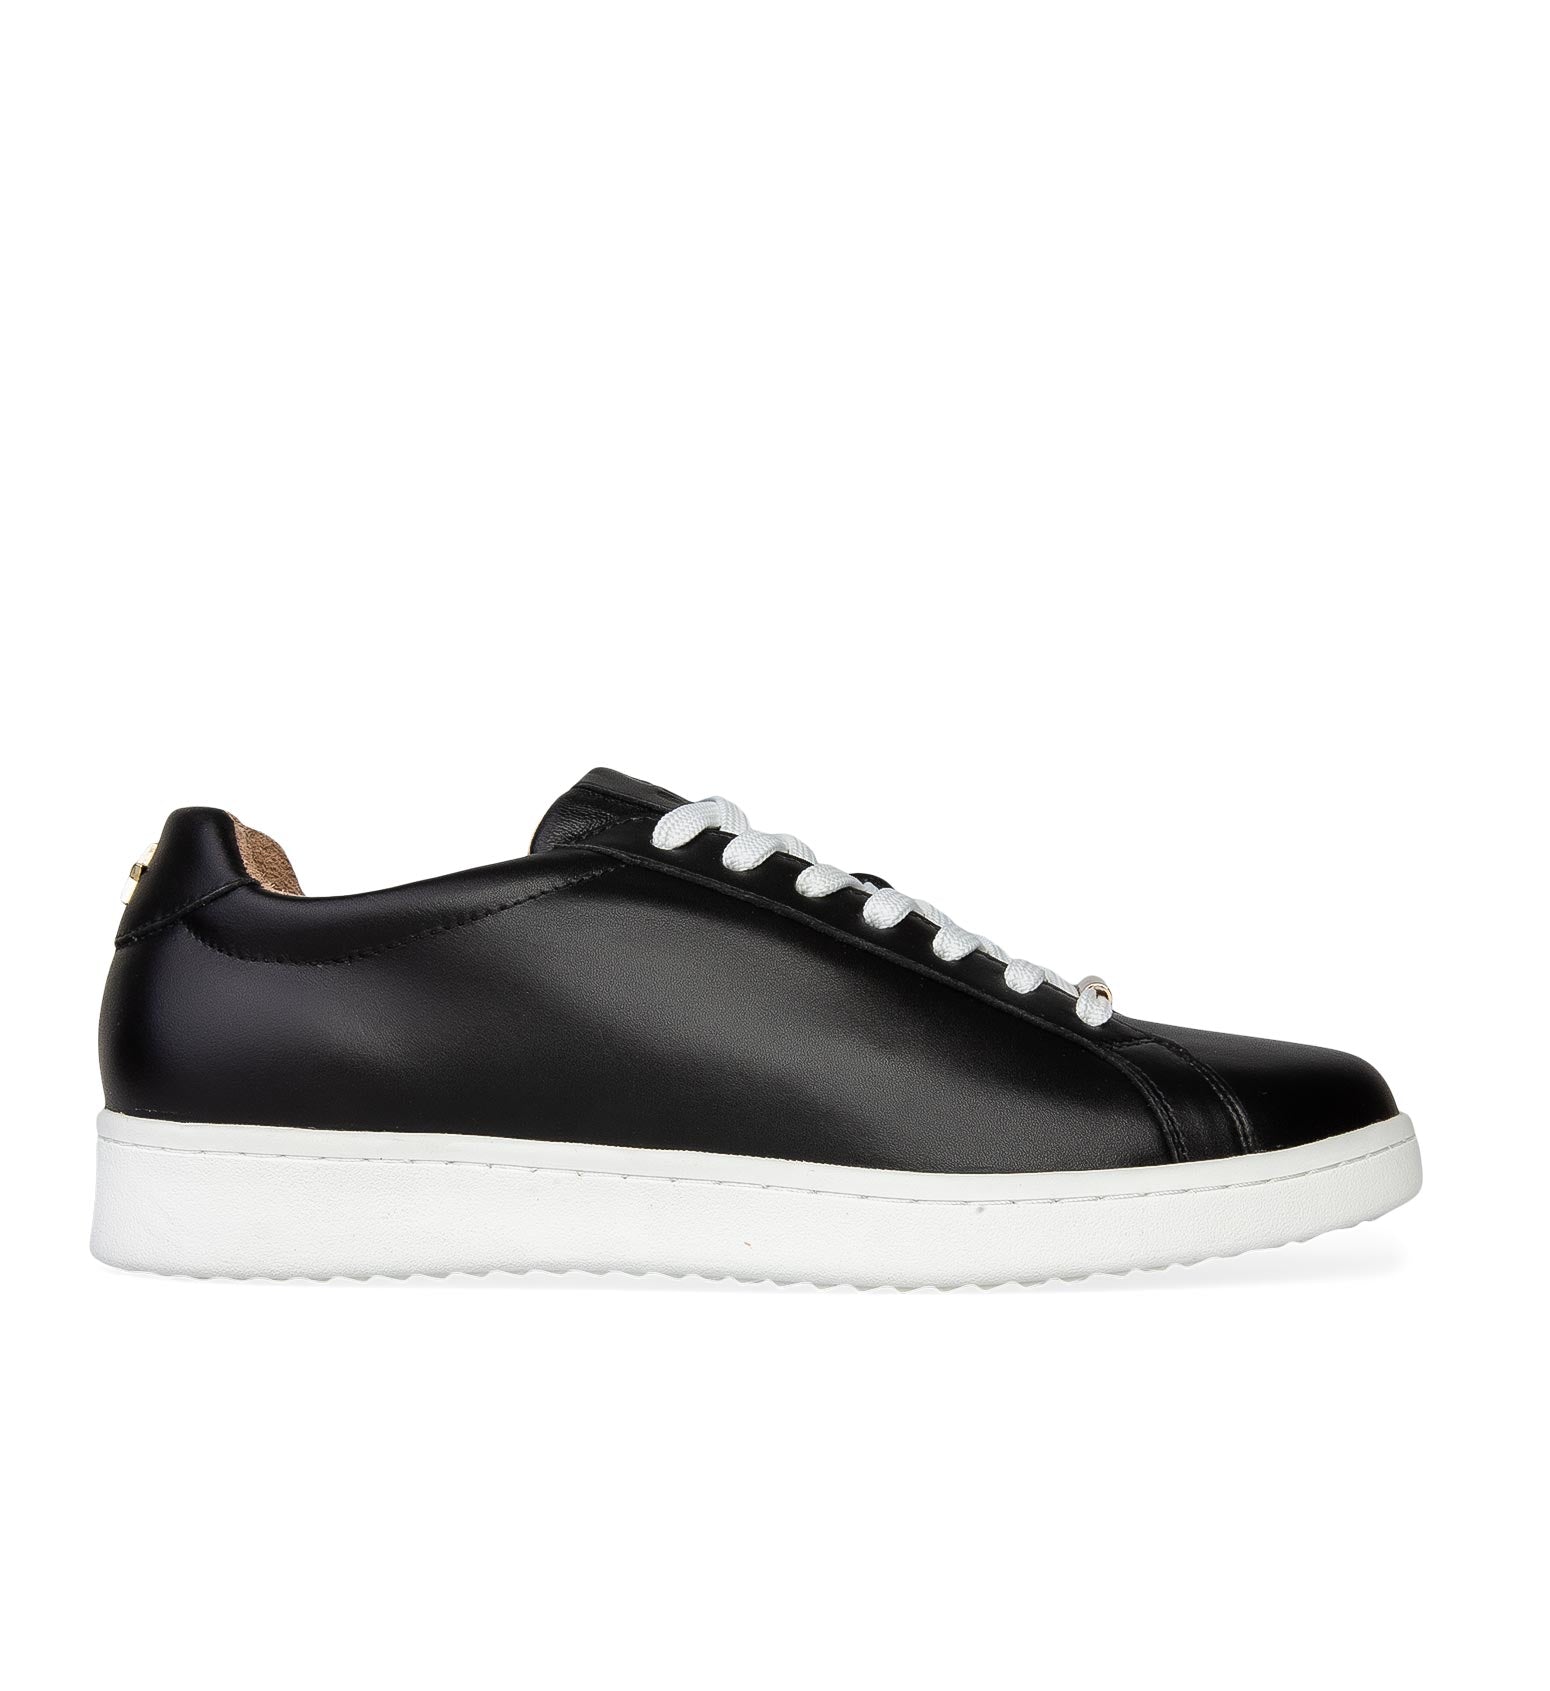 Whimbrel Black Leather & Gold Star Sneakers | Bared Footwear